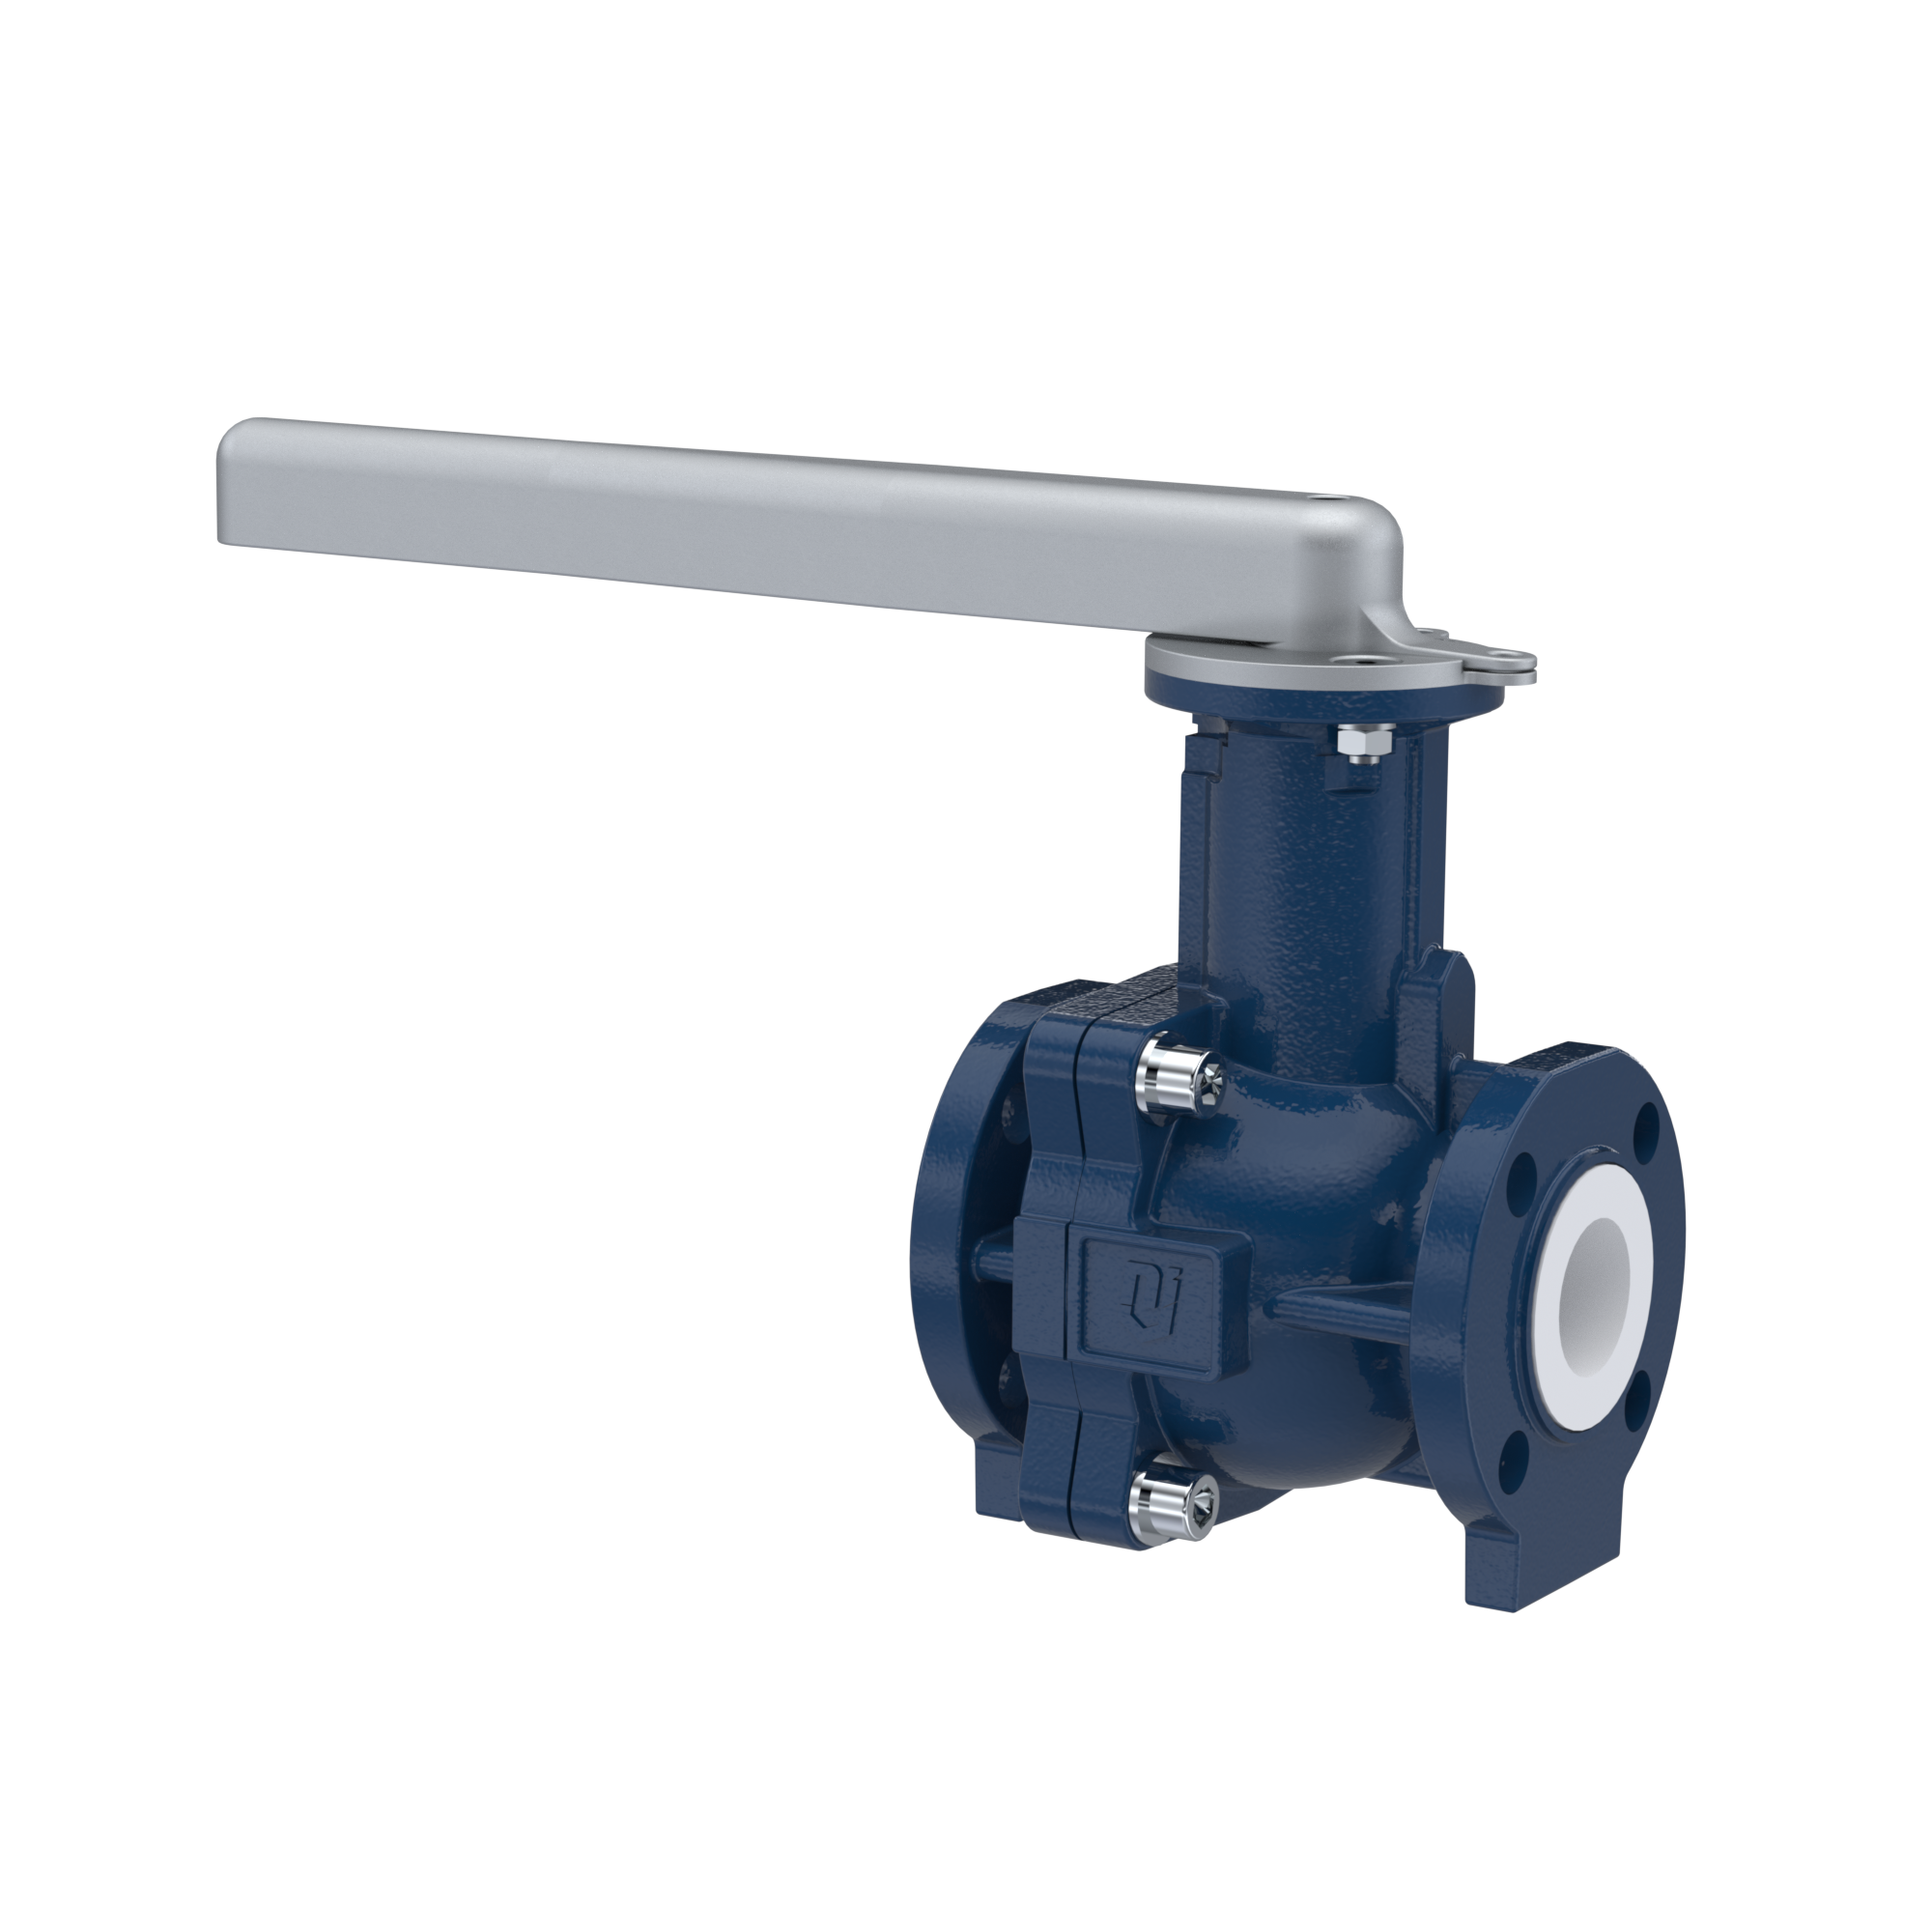 PFA-flange ball valve FK13 DN15 - 1/2" inch ANSI 150 made of spheroidal graphite cast iron with lever hand